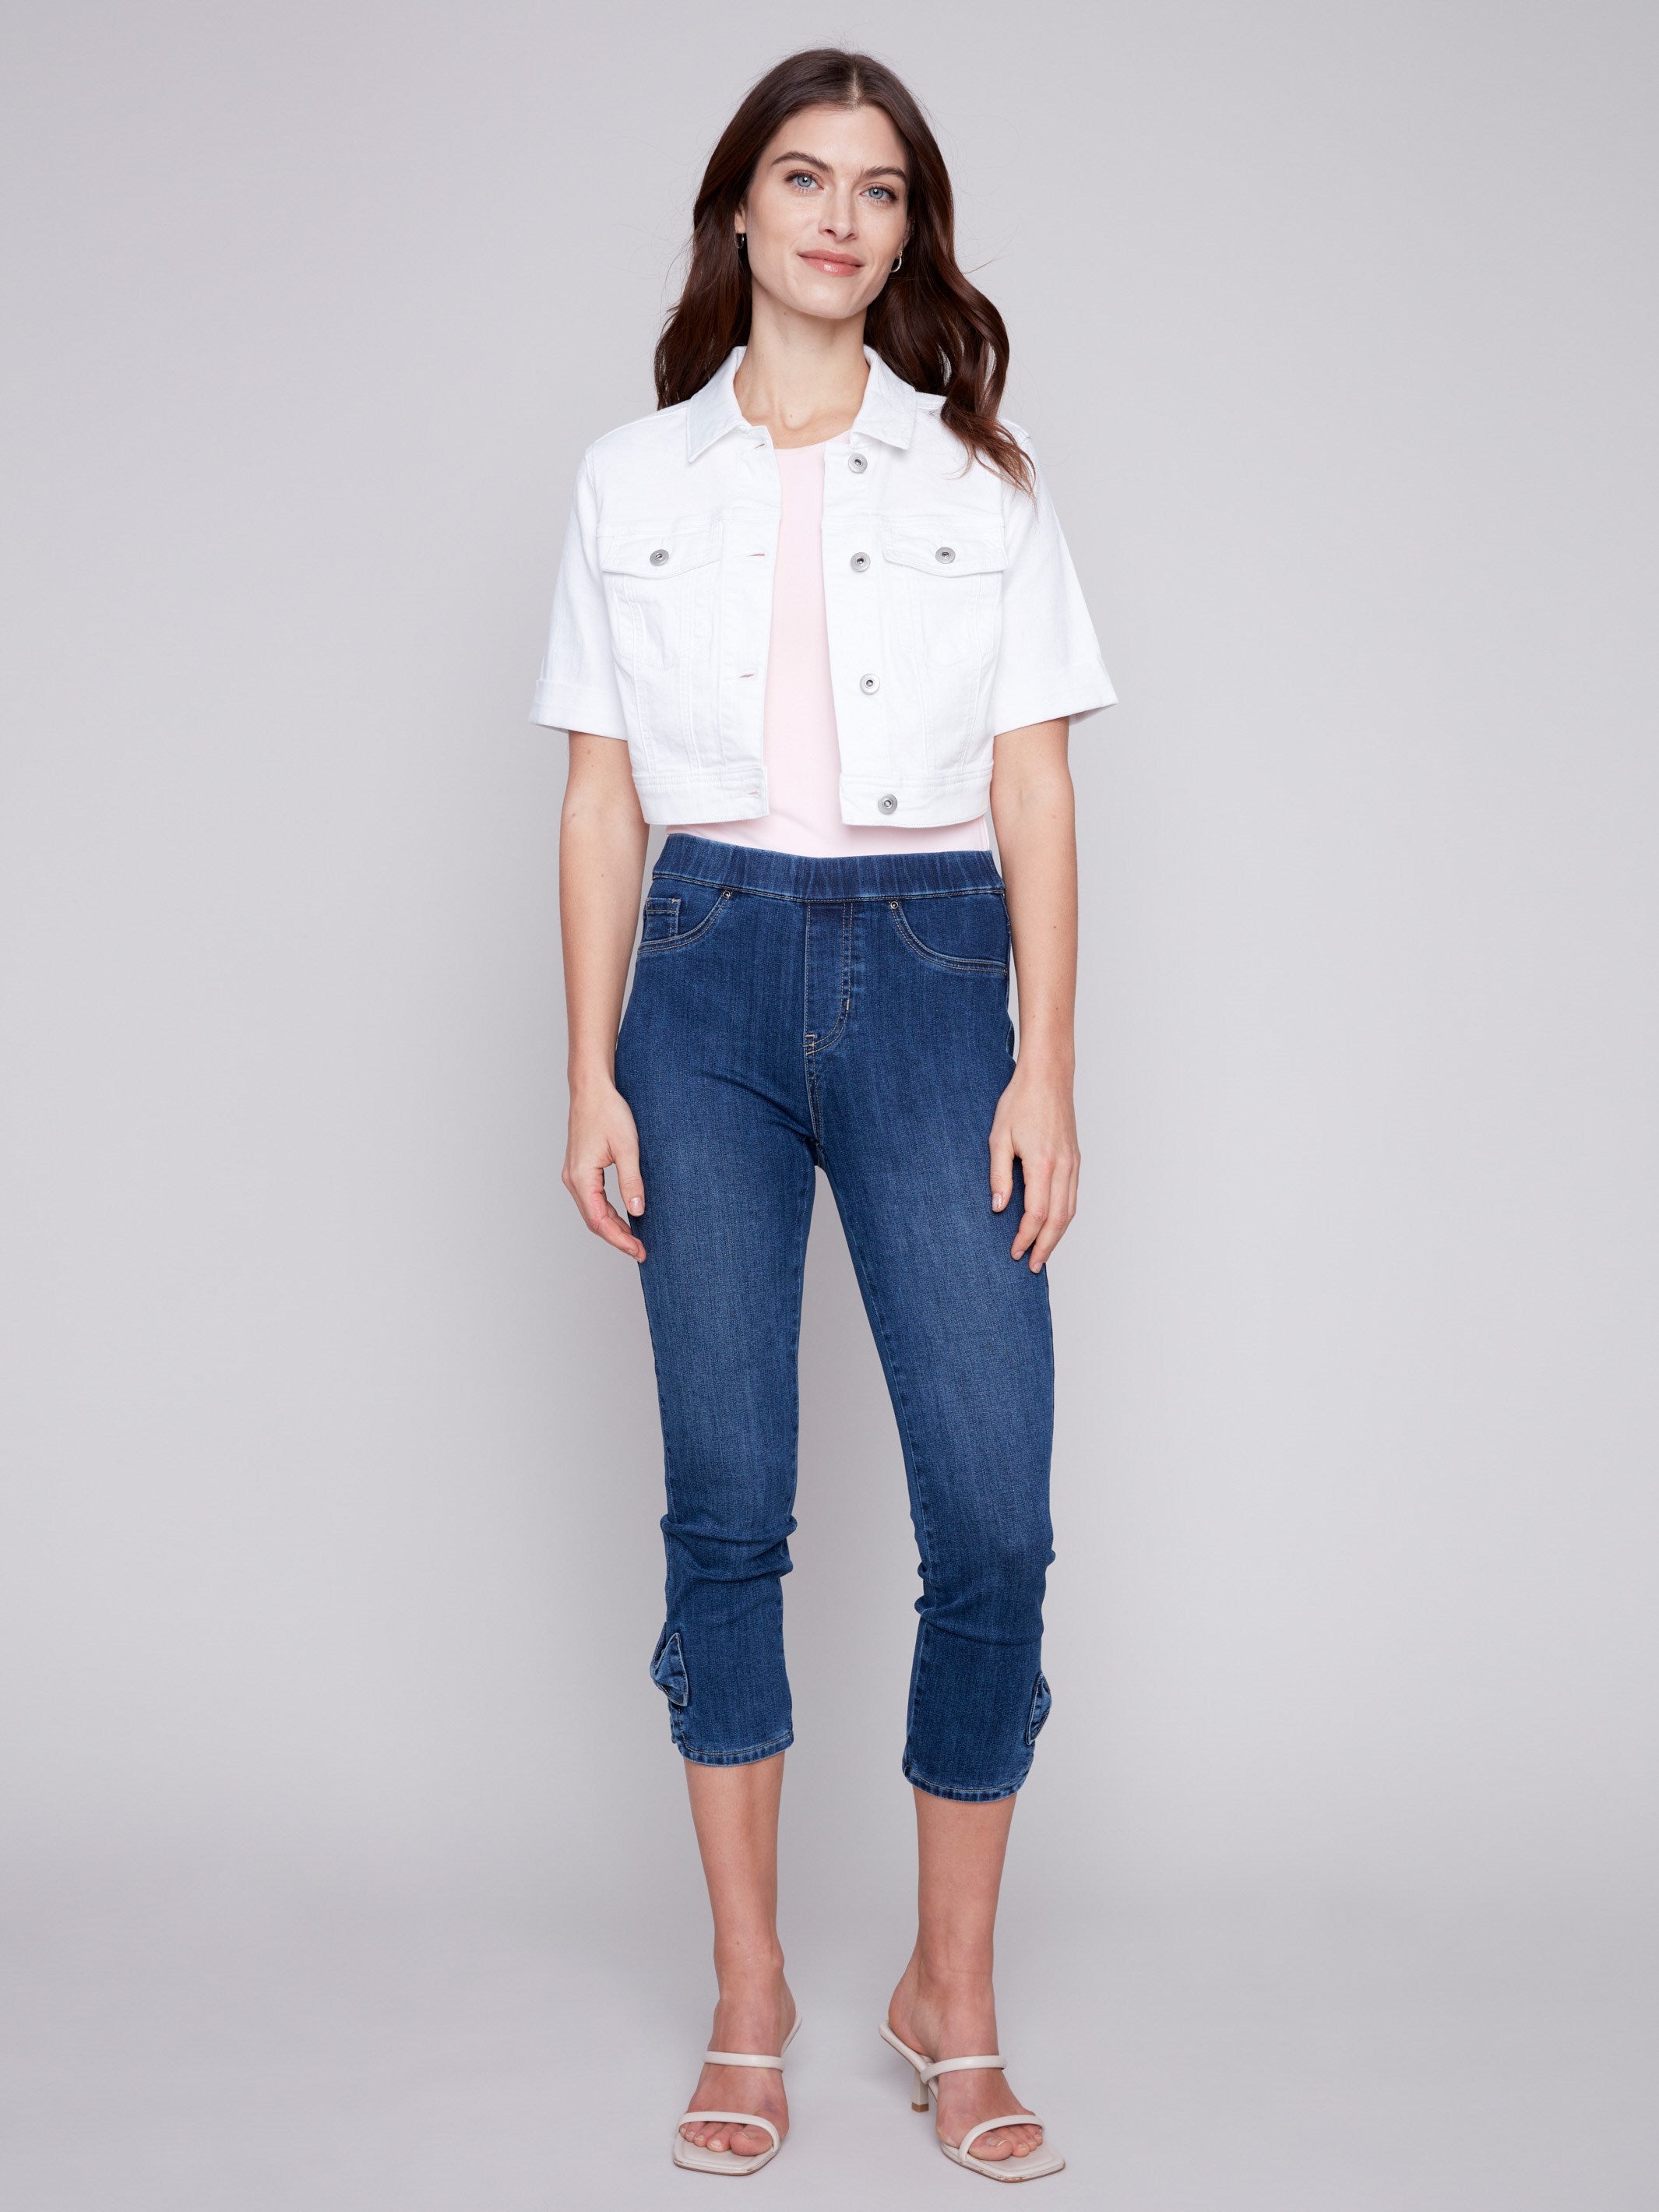 Cropped Twill Jean Jacket - White - Charlie B Collection Canada - Image 2